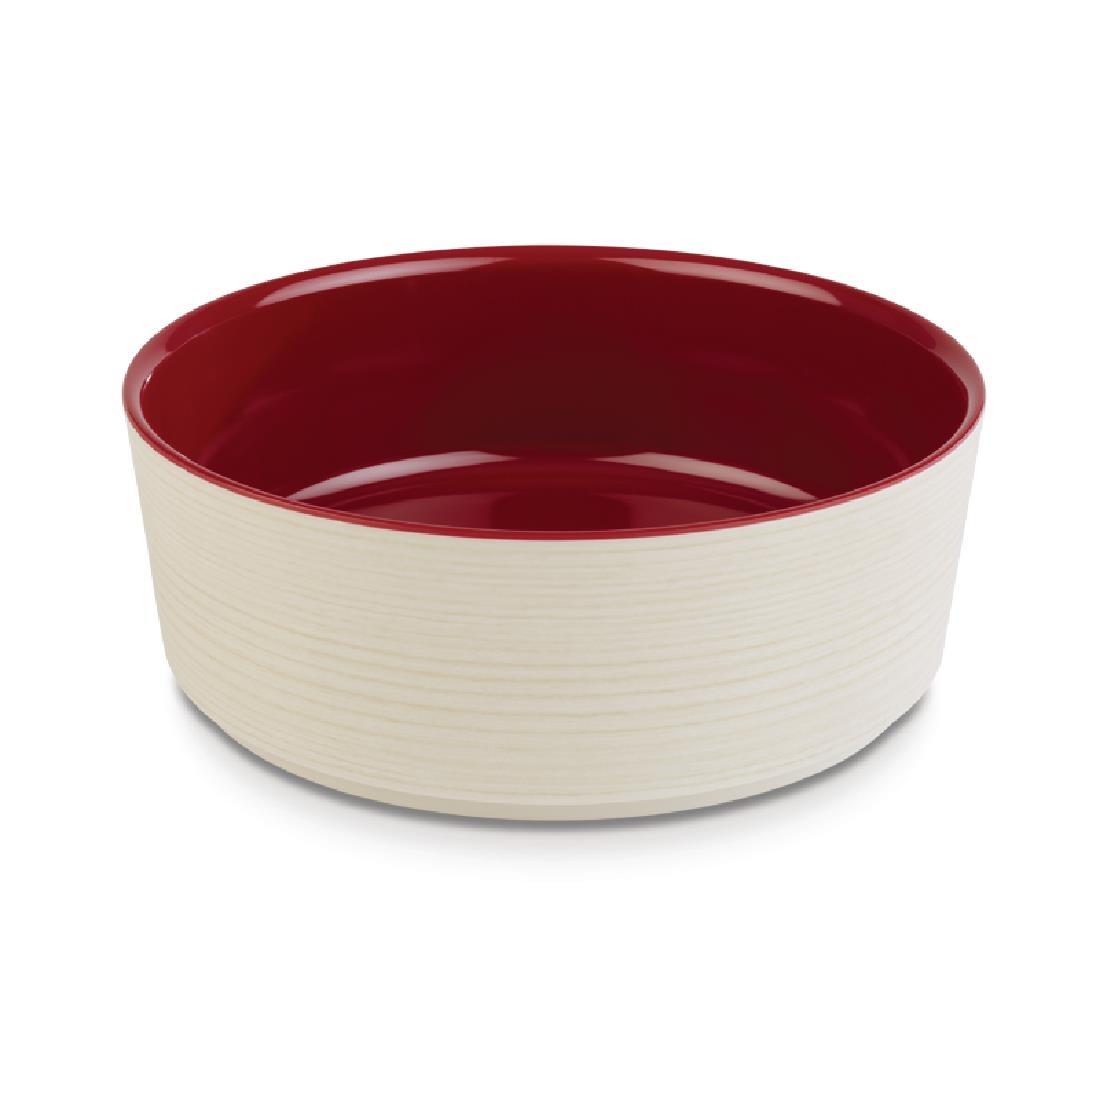 APS+ Melamine Round Bowl Maple and Red 1.5 Ltr - DE567  - 1